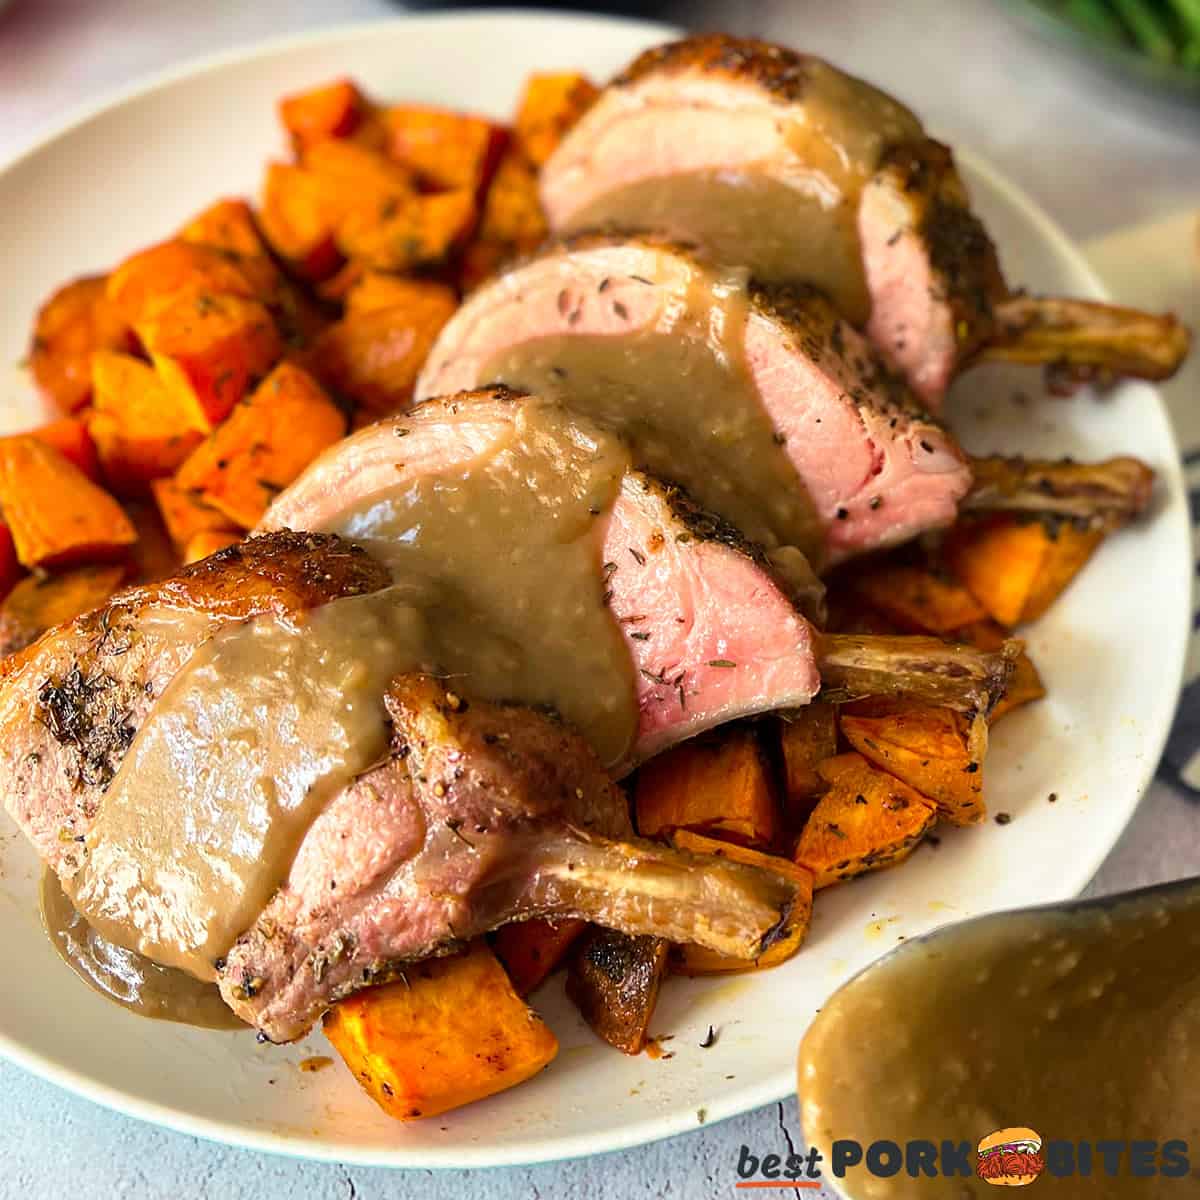 a plate of pork robs and sweet potatoes with gravy